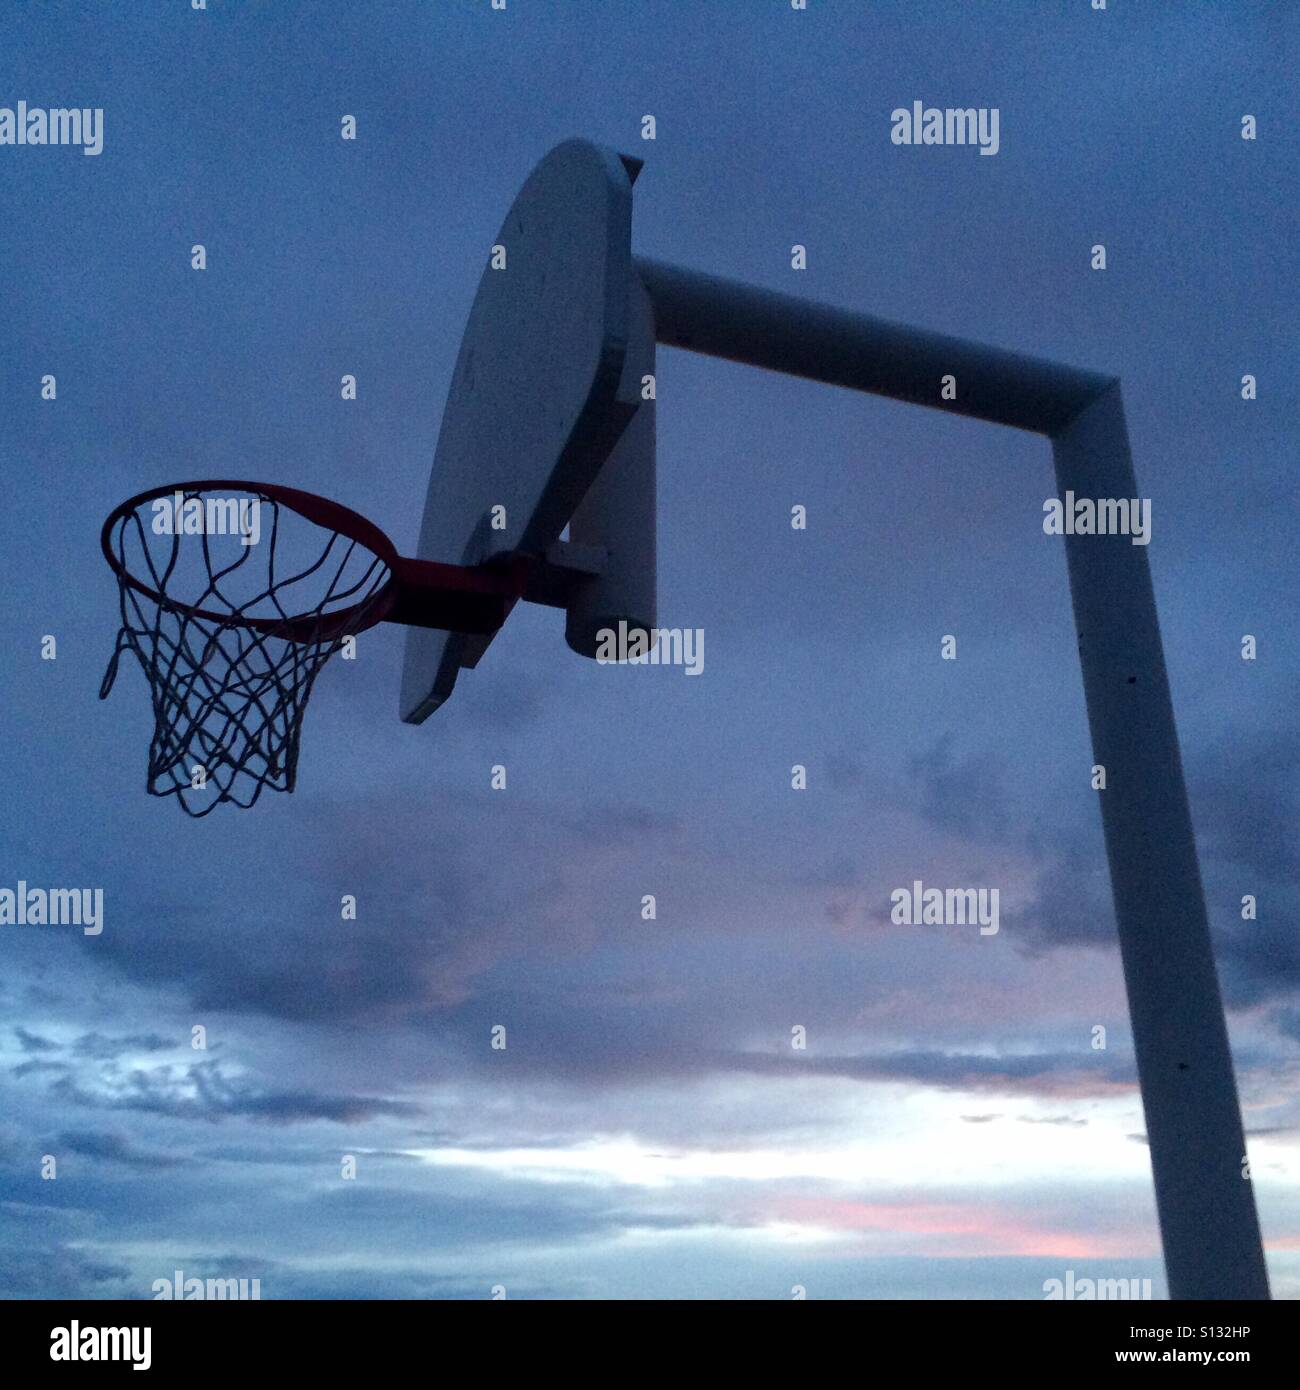 Playground basketball hoop before a sunset. Stock Photo